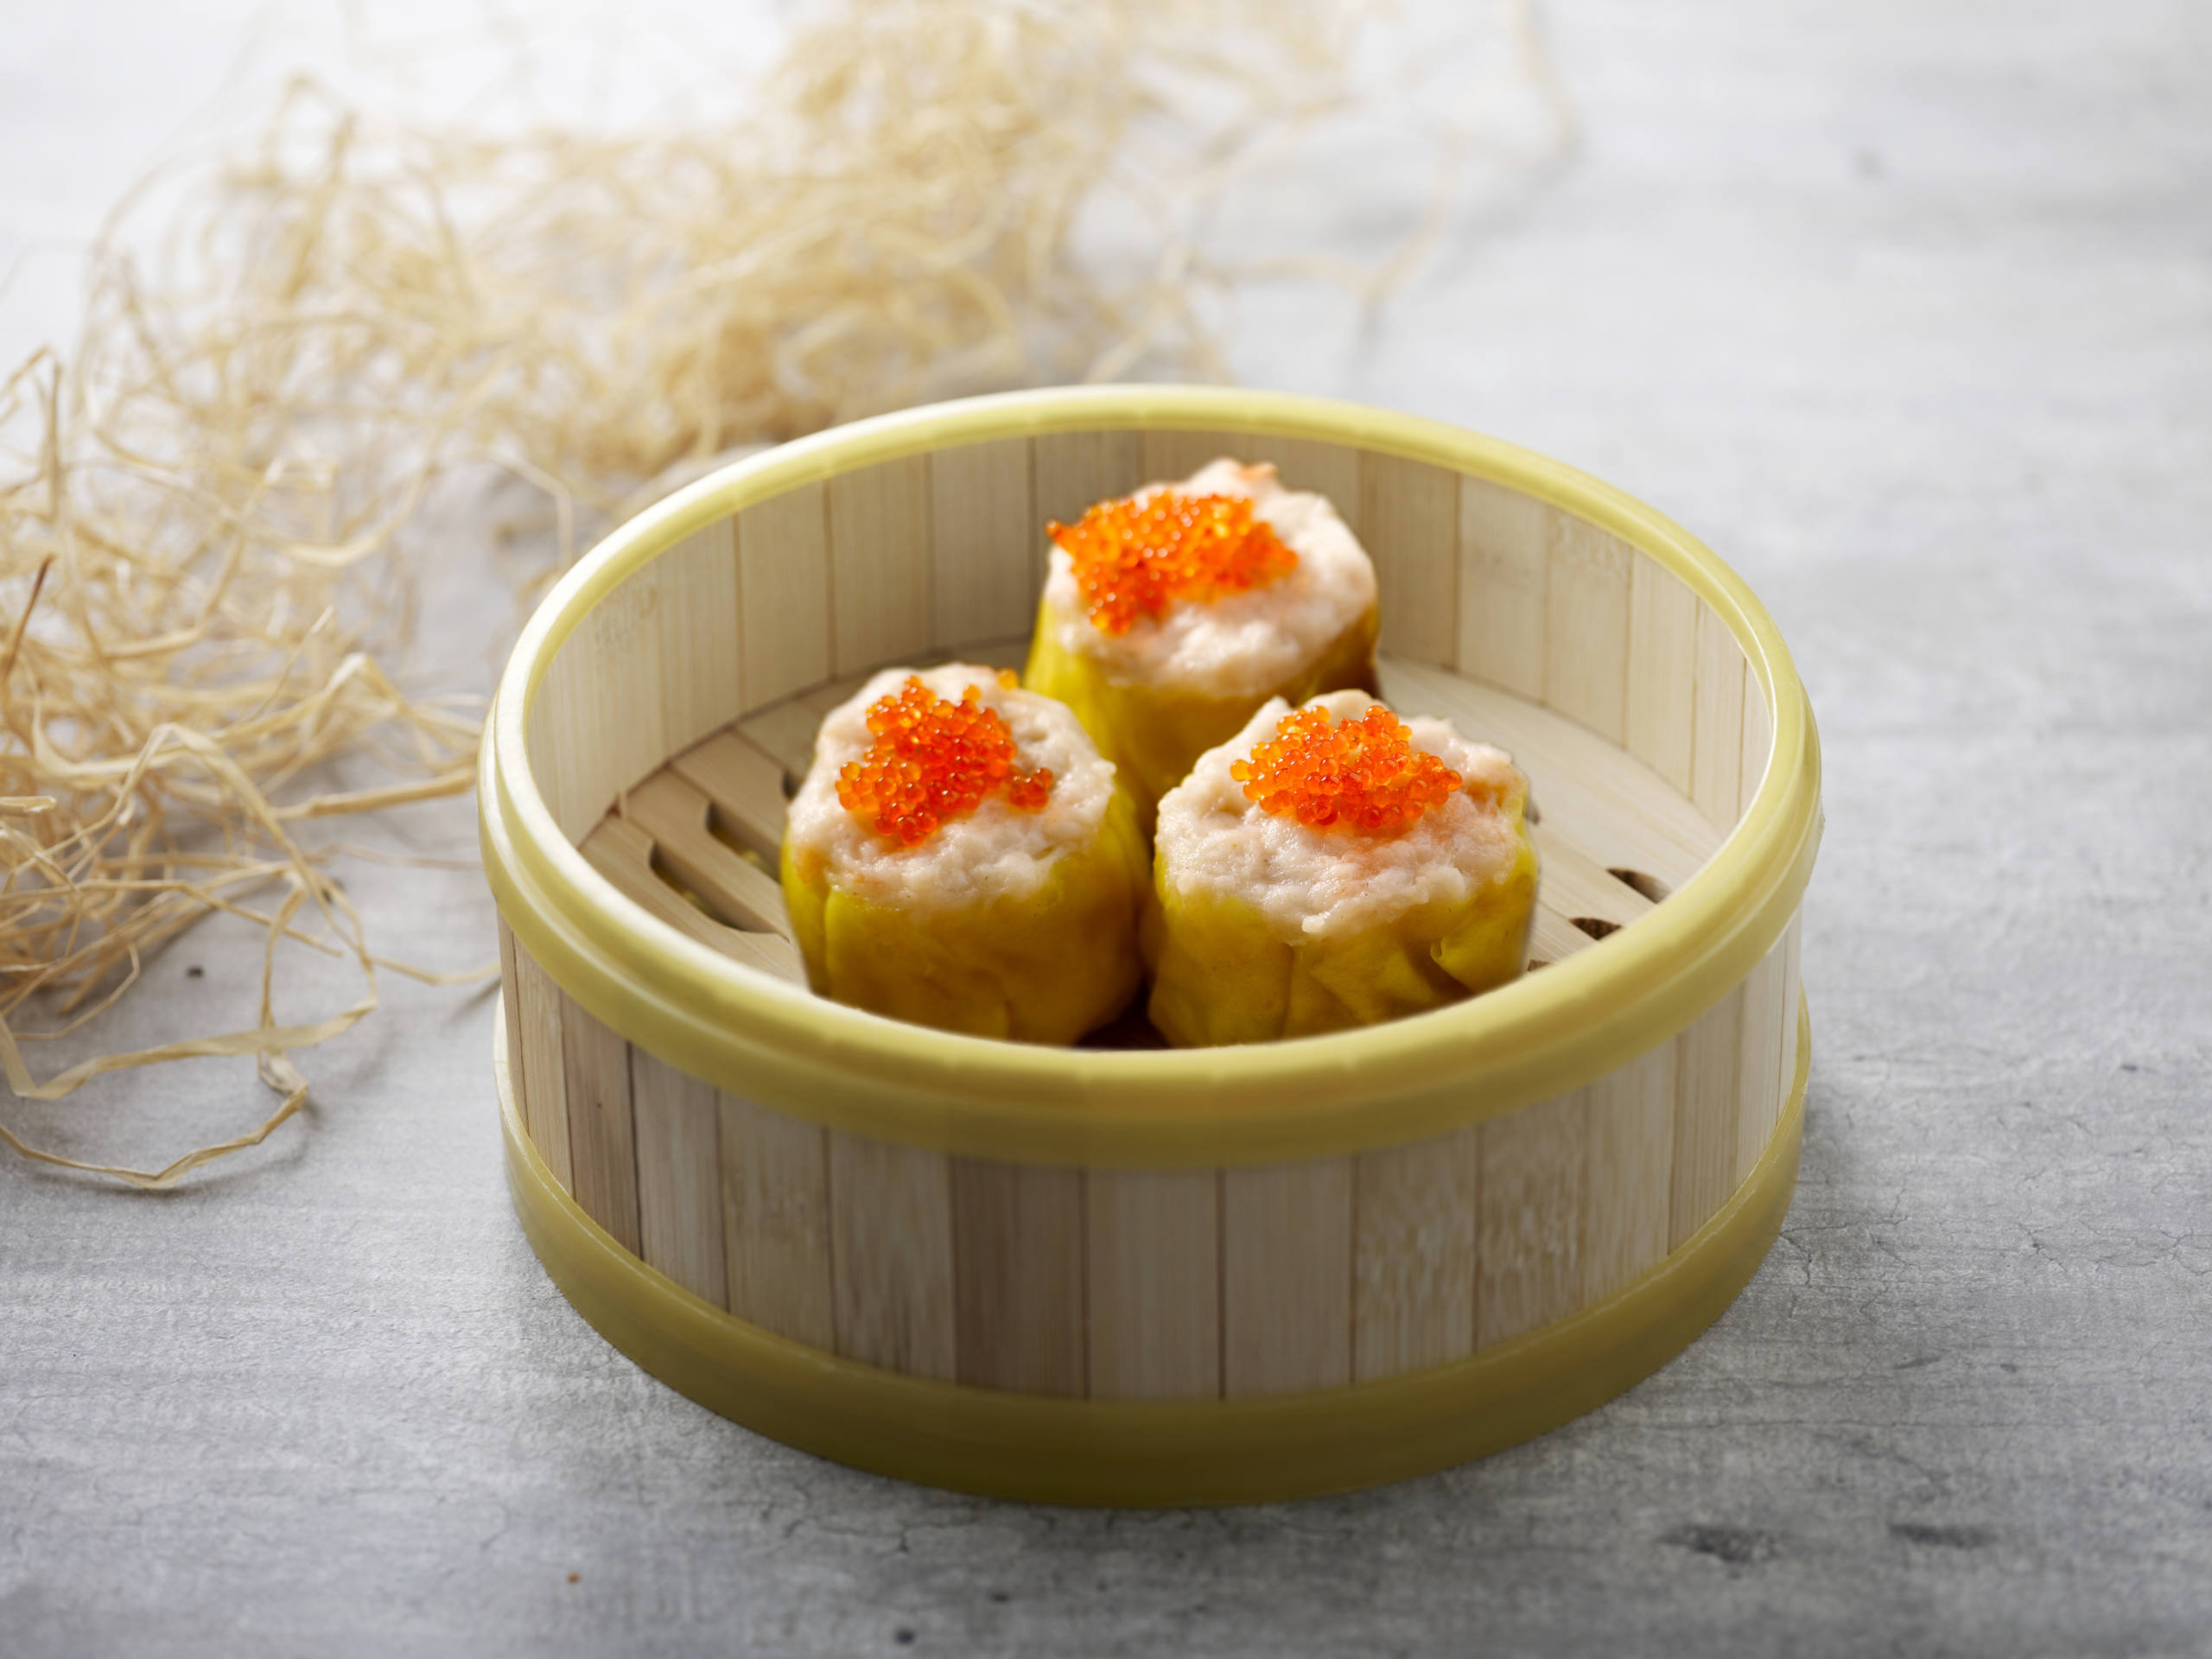 Crystal Jade Hong Kong Kitchen's Steamed Siew Mai with Fish Roe, delivered islandwide in Singapore powered by Oddle.